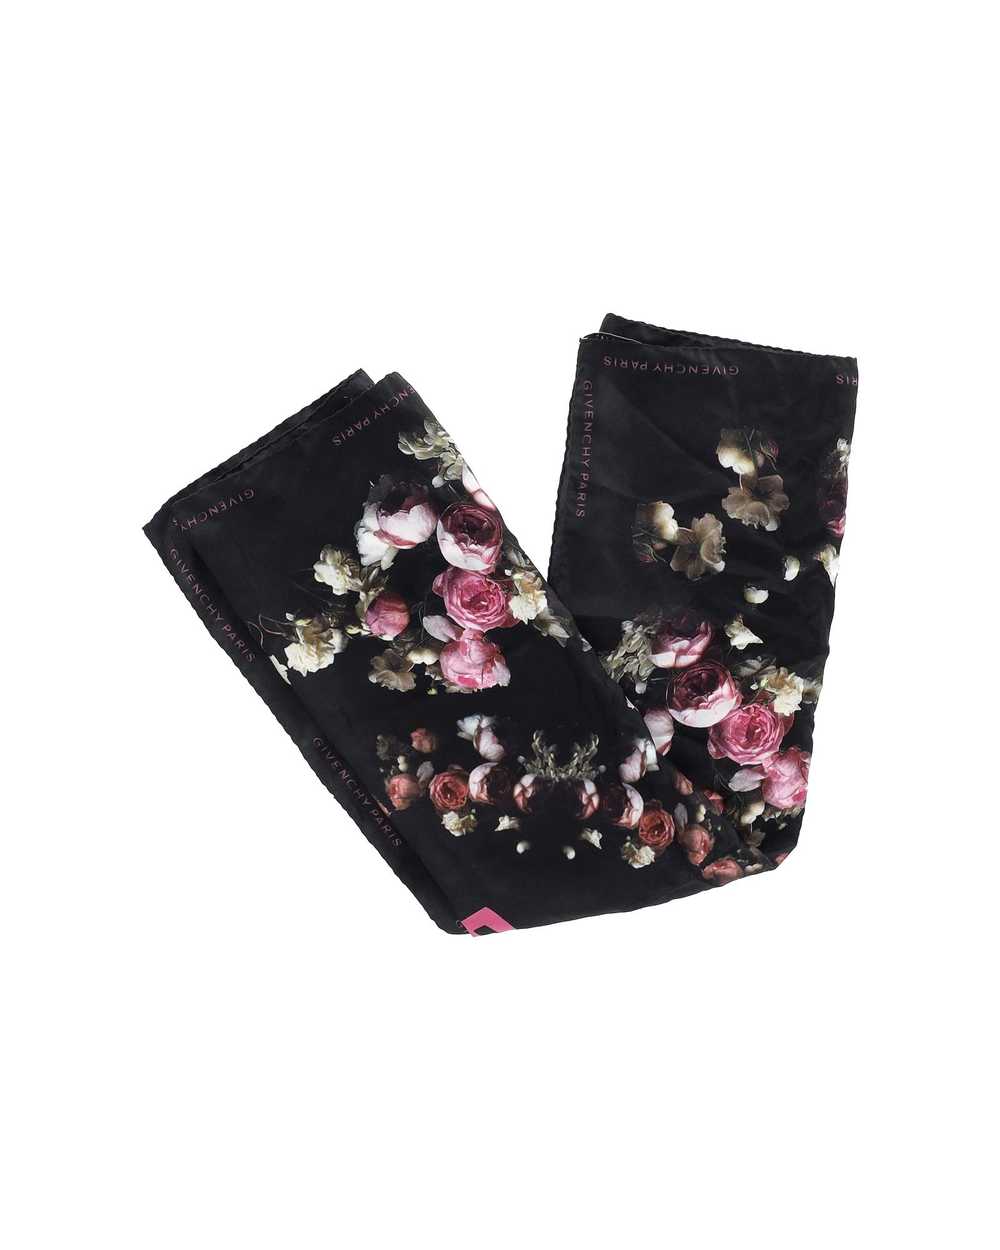 Product Details Givenchy Black Floral Silk Scarf - image 1